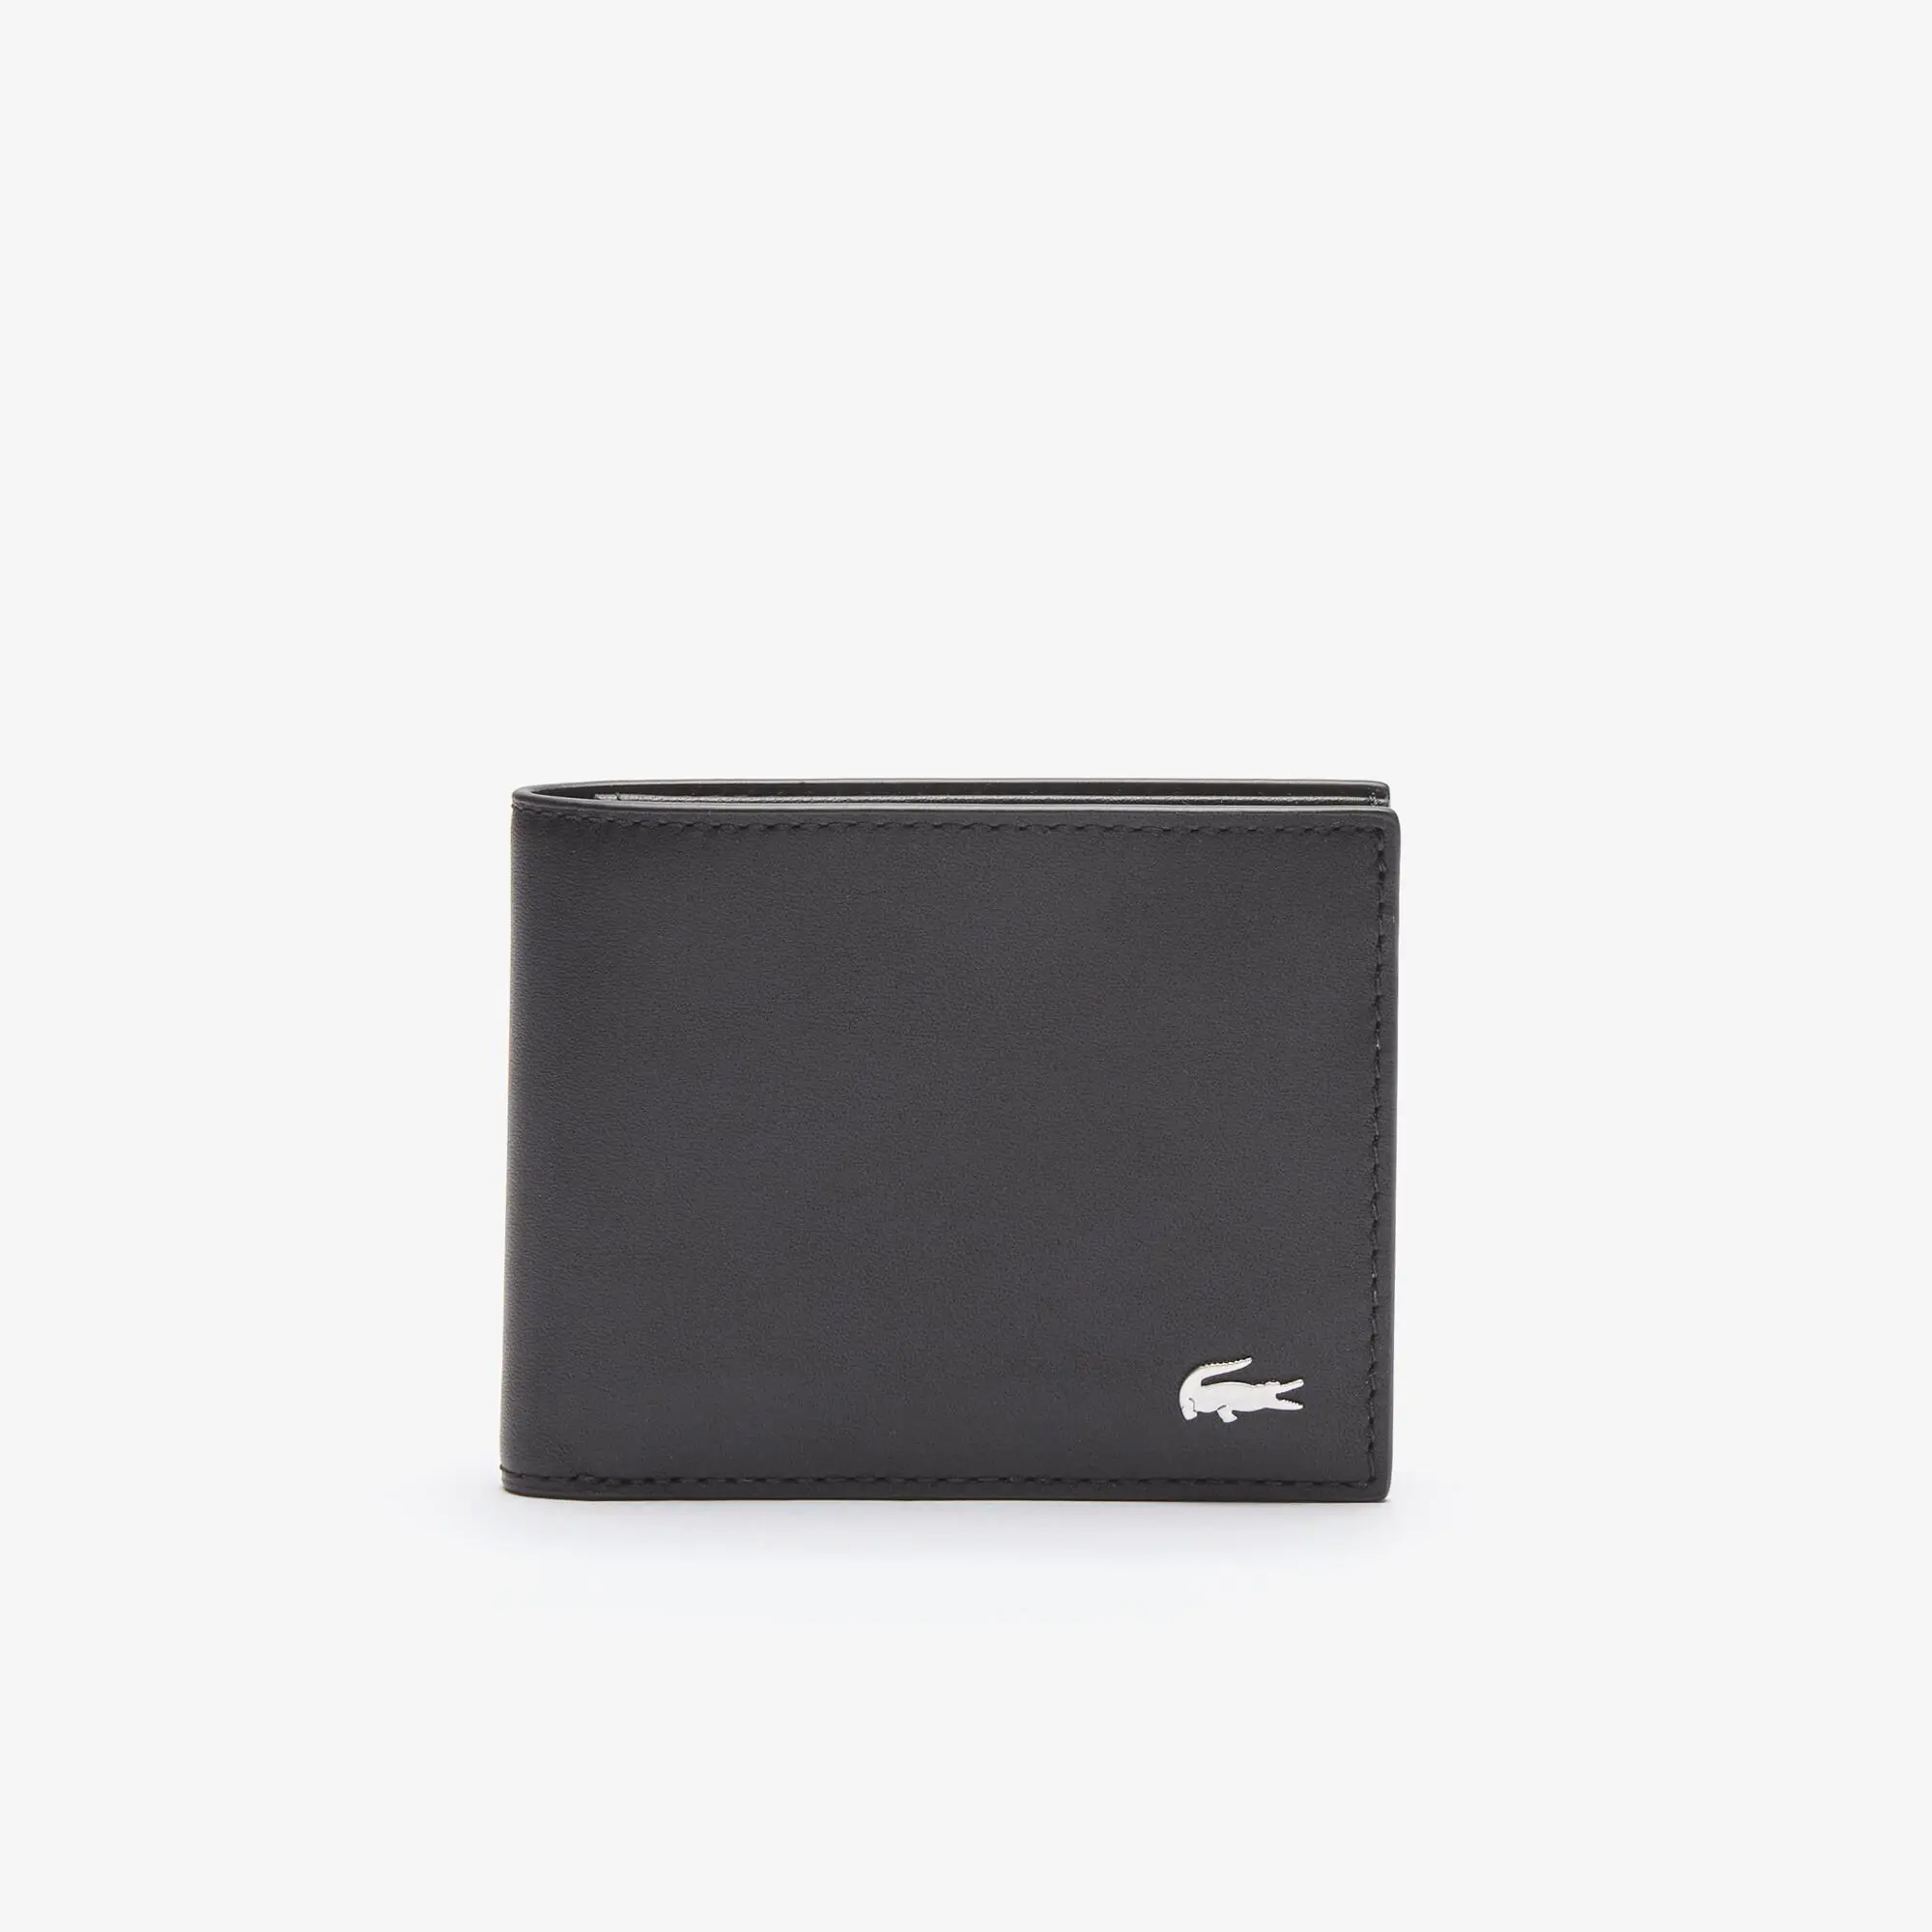 Lacoste Men's Fitzgerald billfold in leather with ID card holder. 1